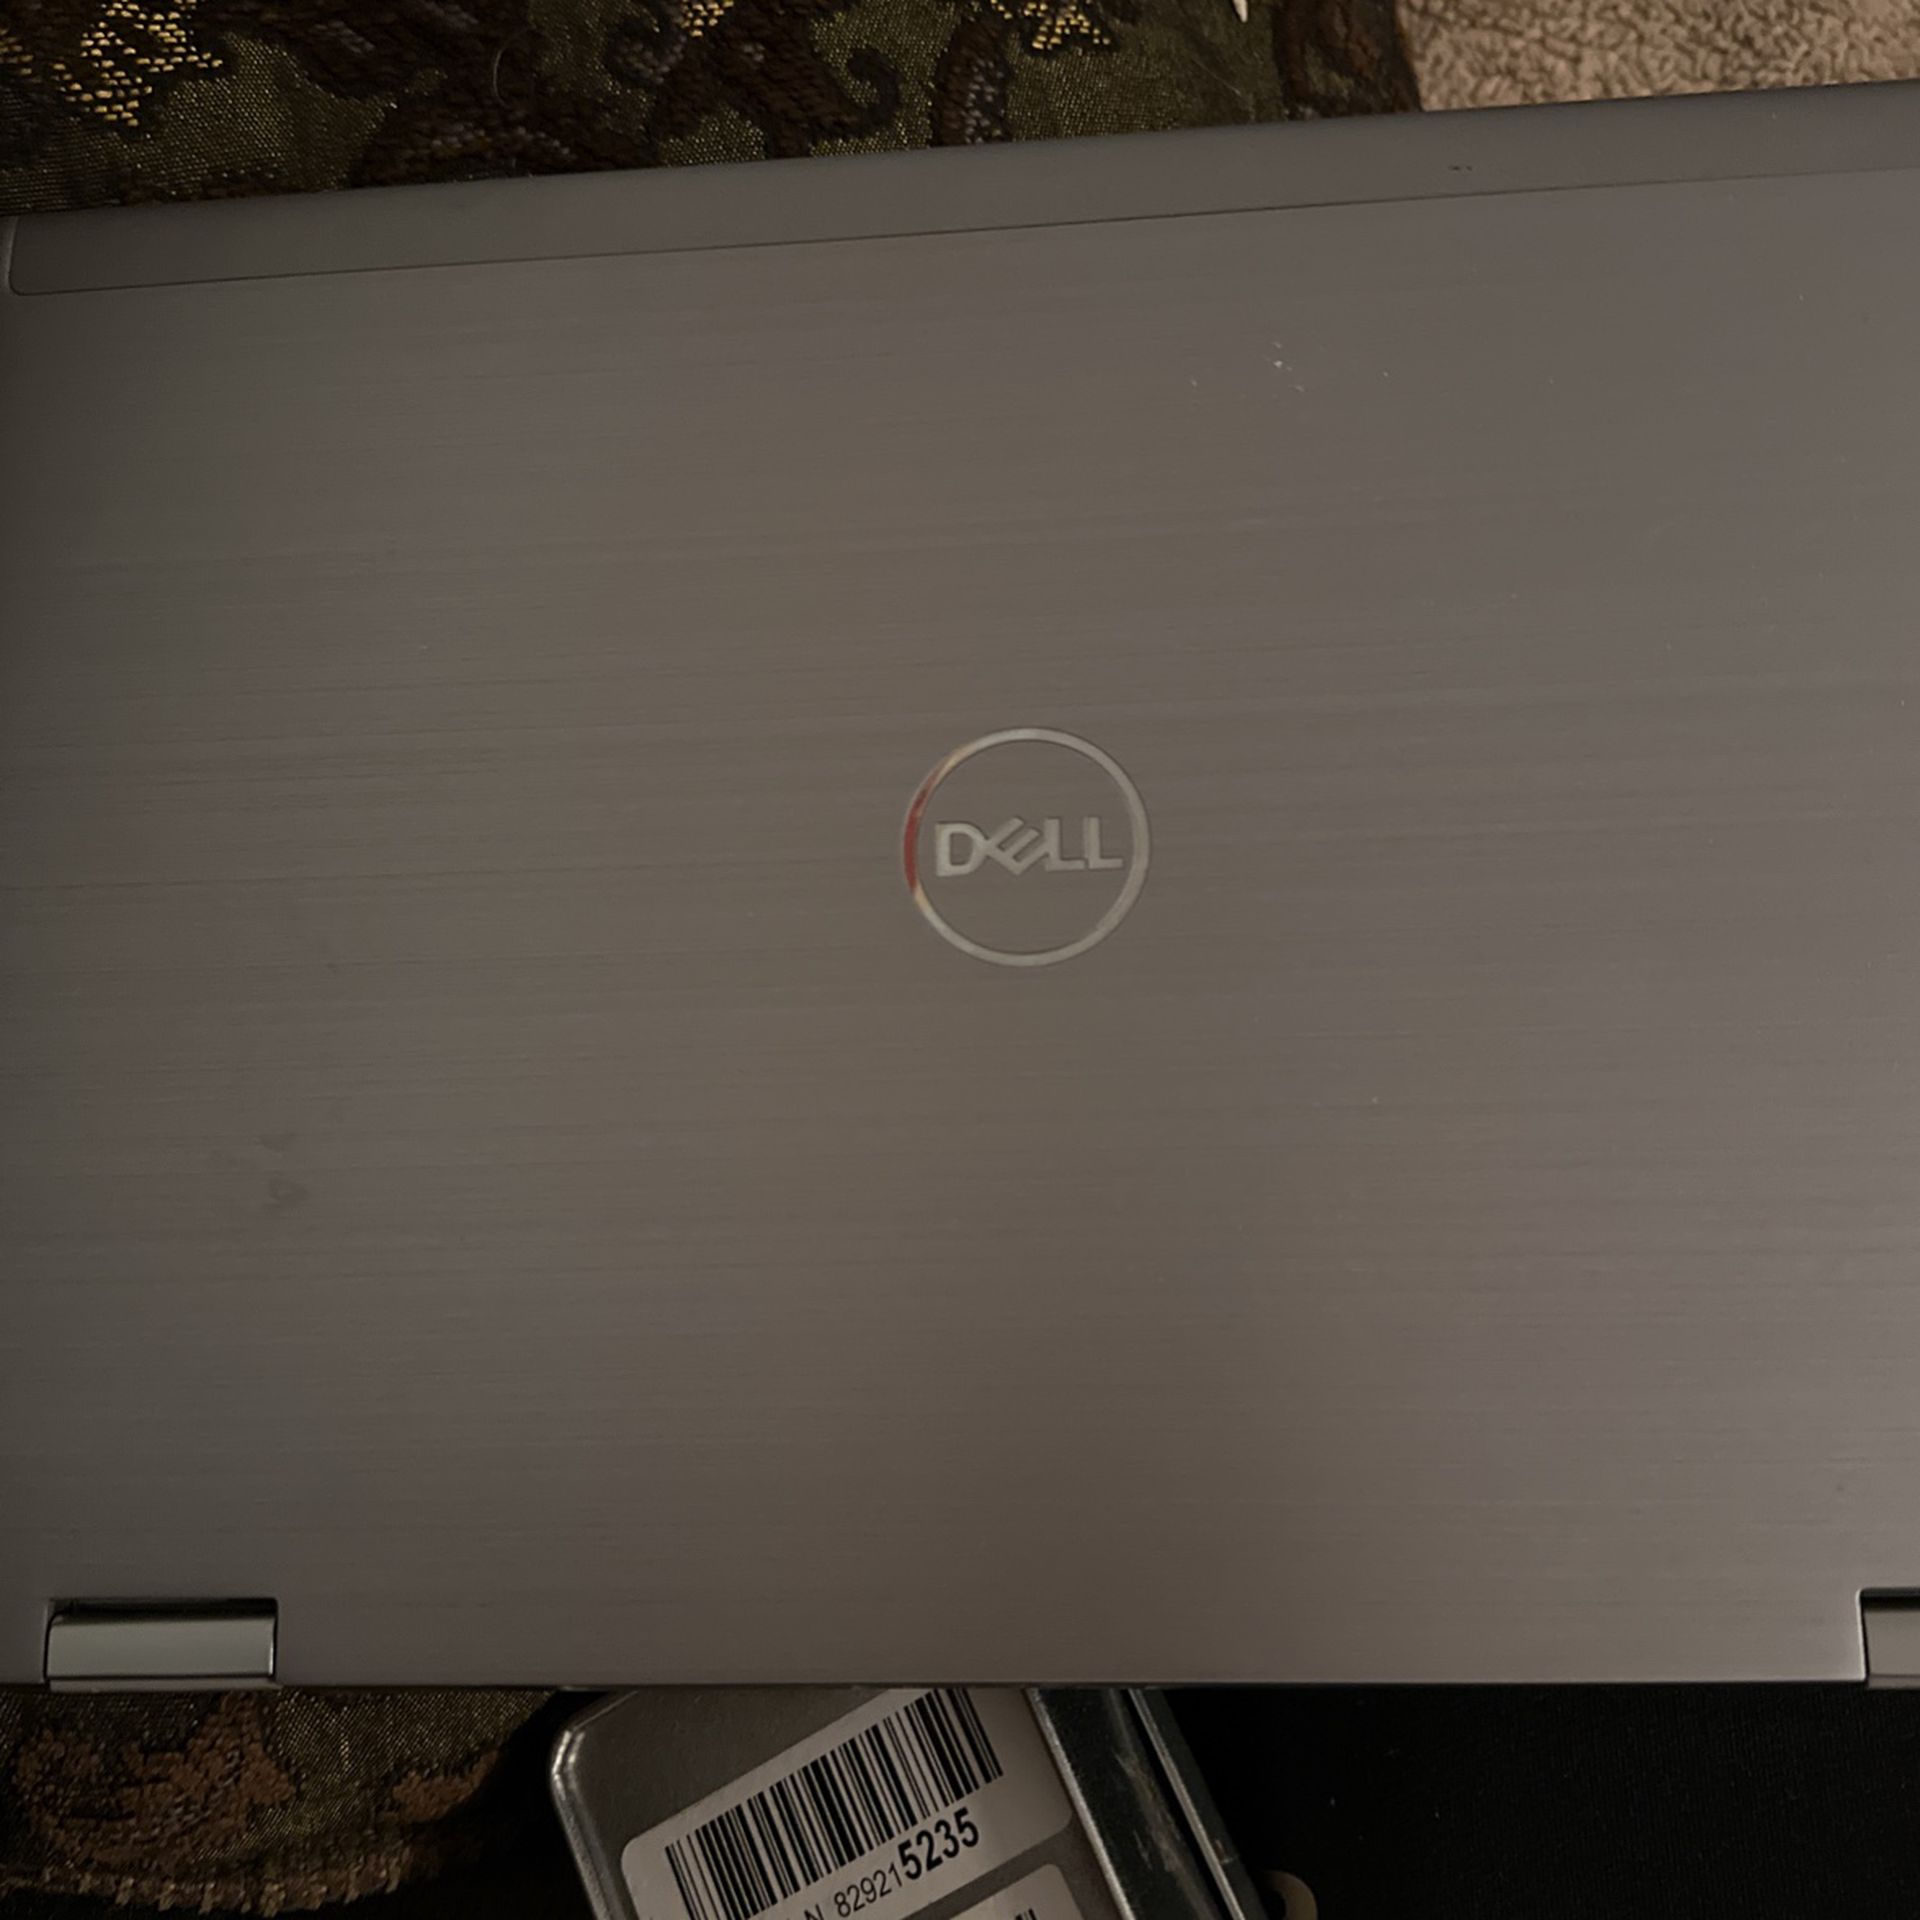 Dell Latitude 7320 for Sale in Parma, OH - OfferUp